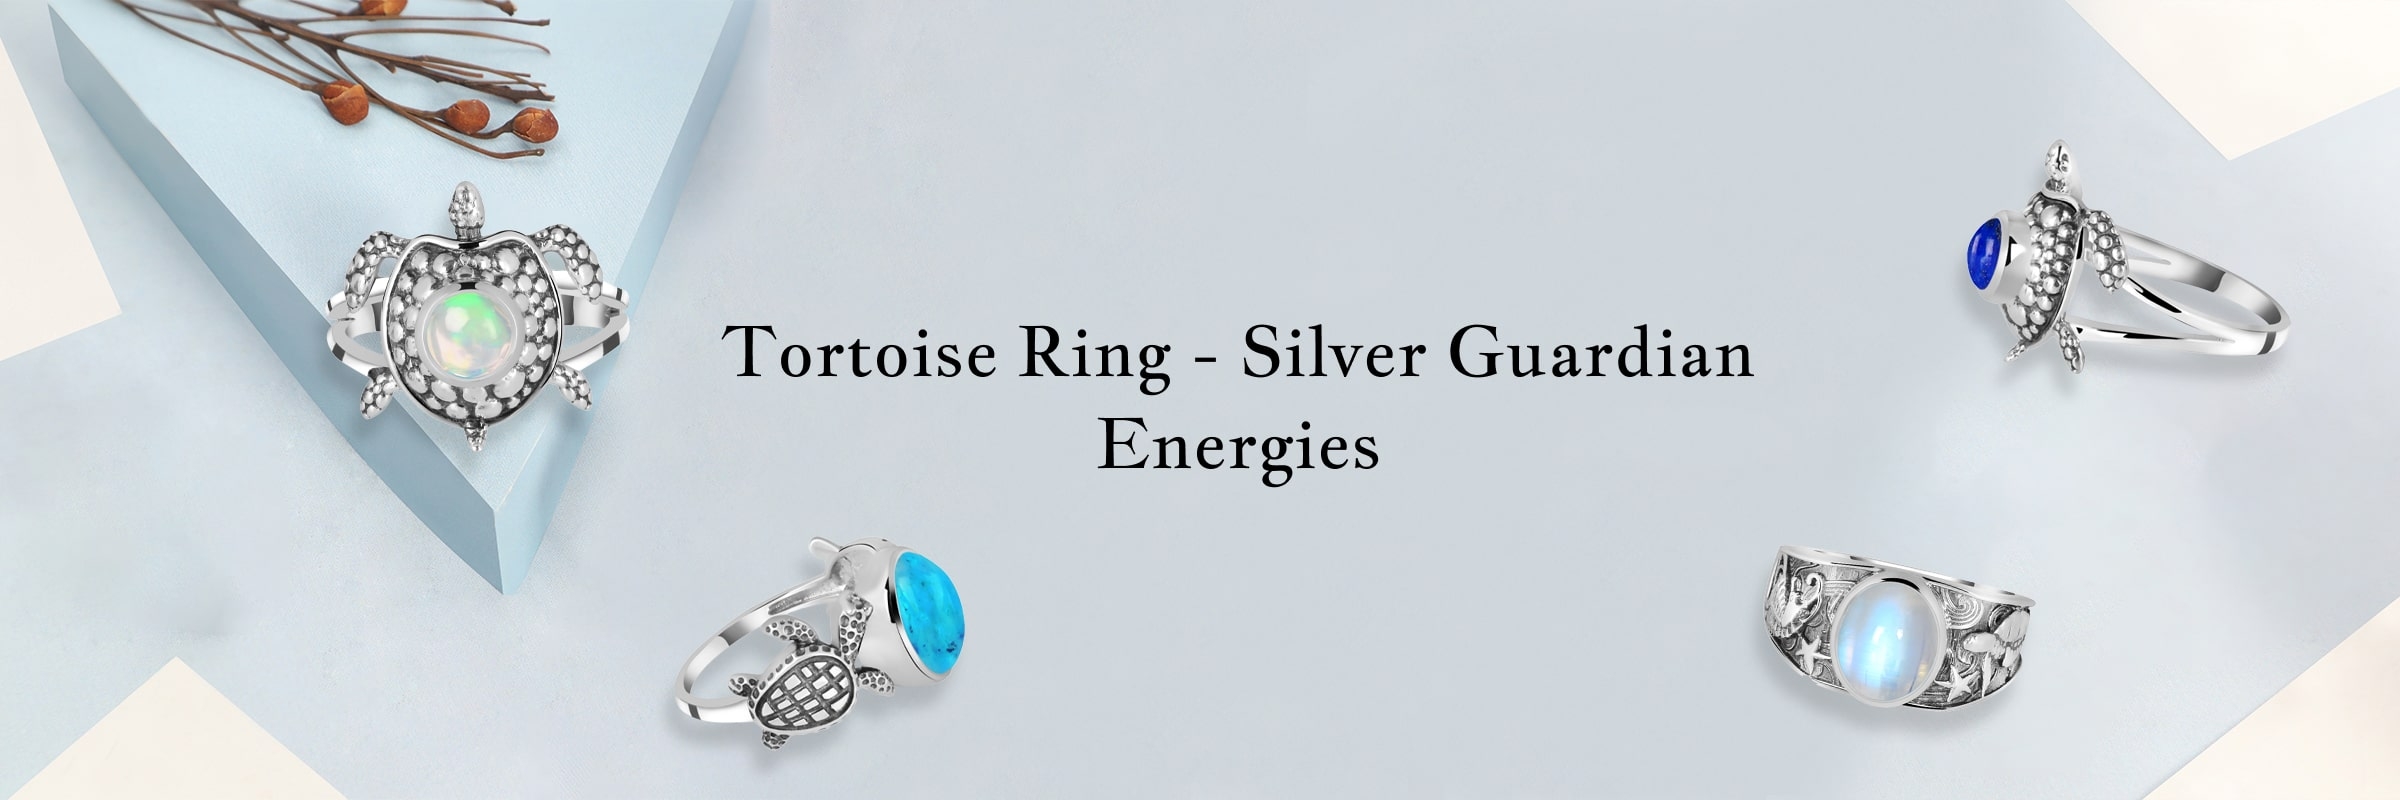 Spiritual Benefits Of Wearing Silver - Learn | Silver Chic